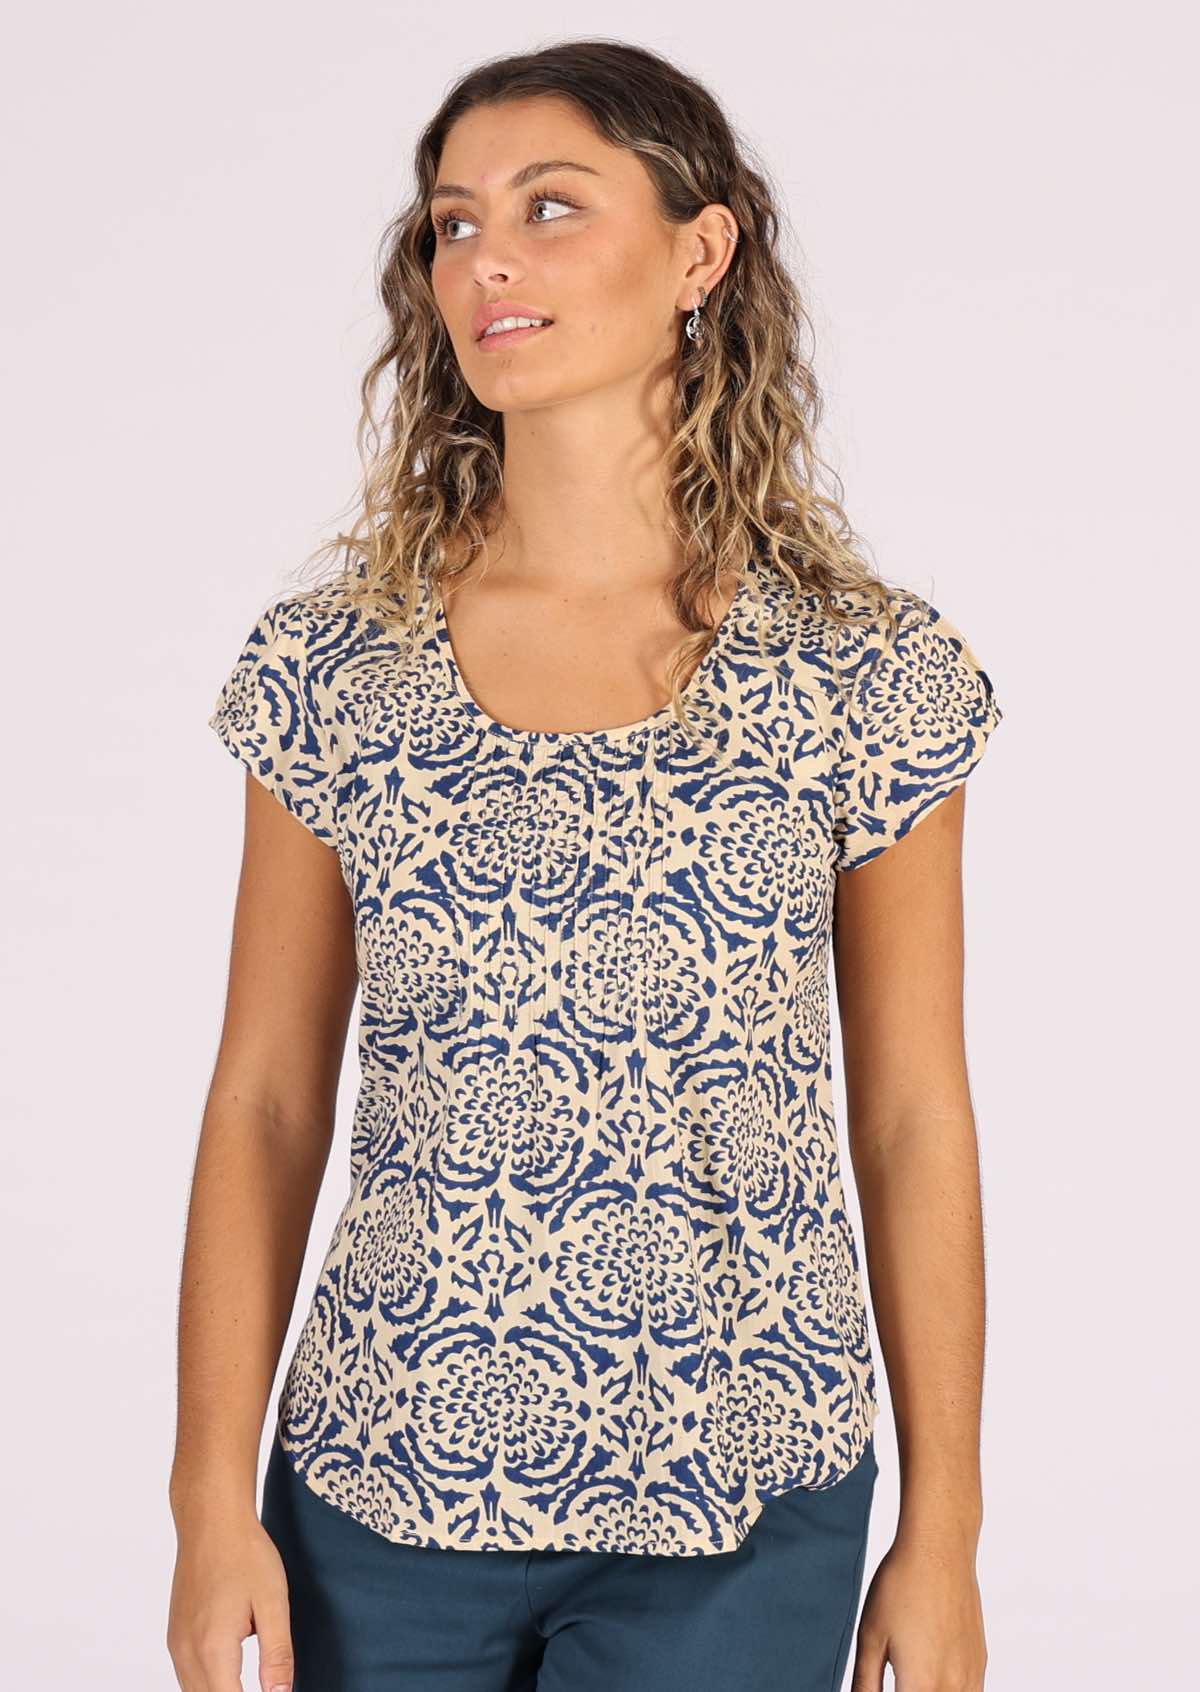 Cotton top with low round neckline and small pin tucks across chest